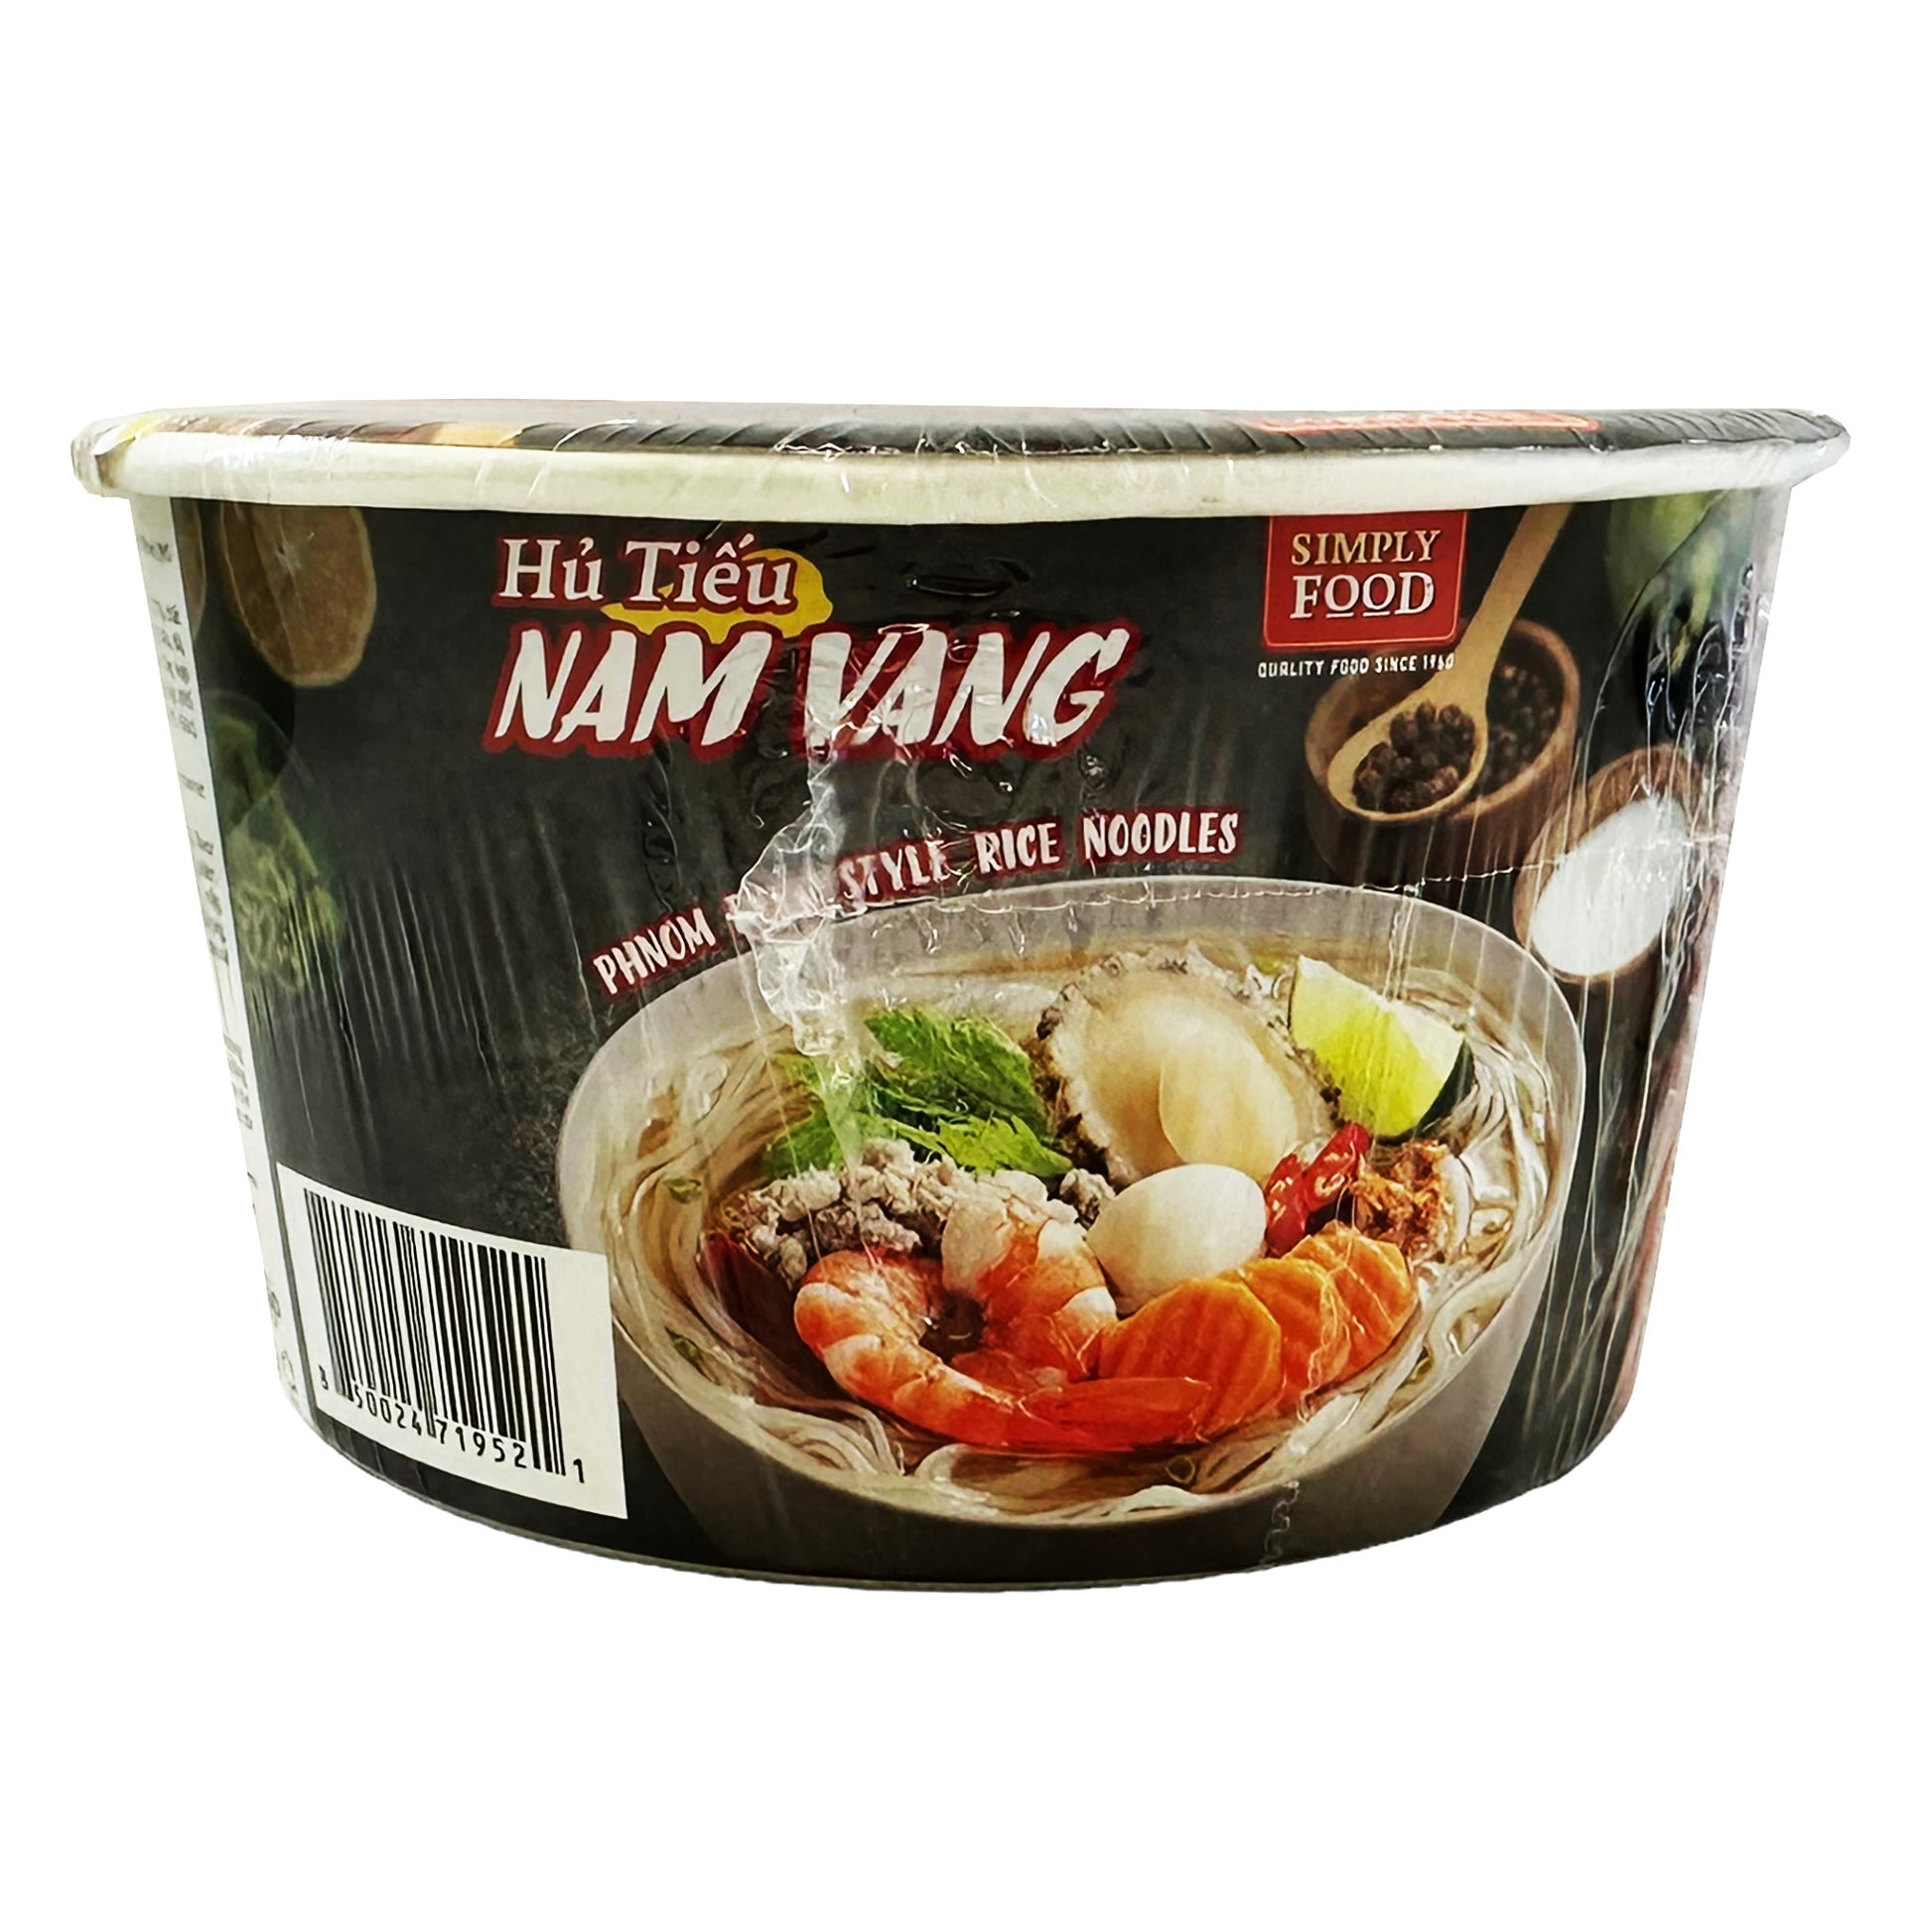 Front graphic image of Simply Food Instant Rice Noodles Bowl - Phnom Penh Flavor 2.64oz (75g)